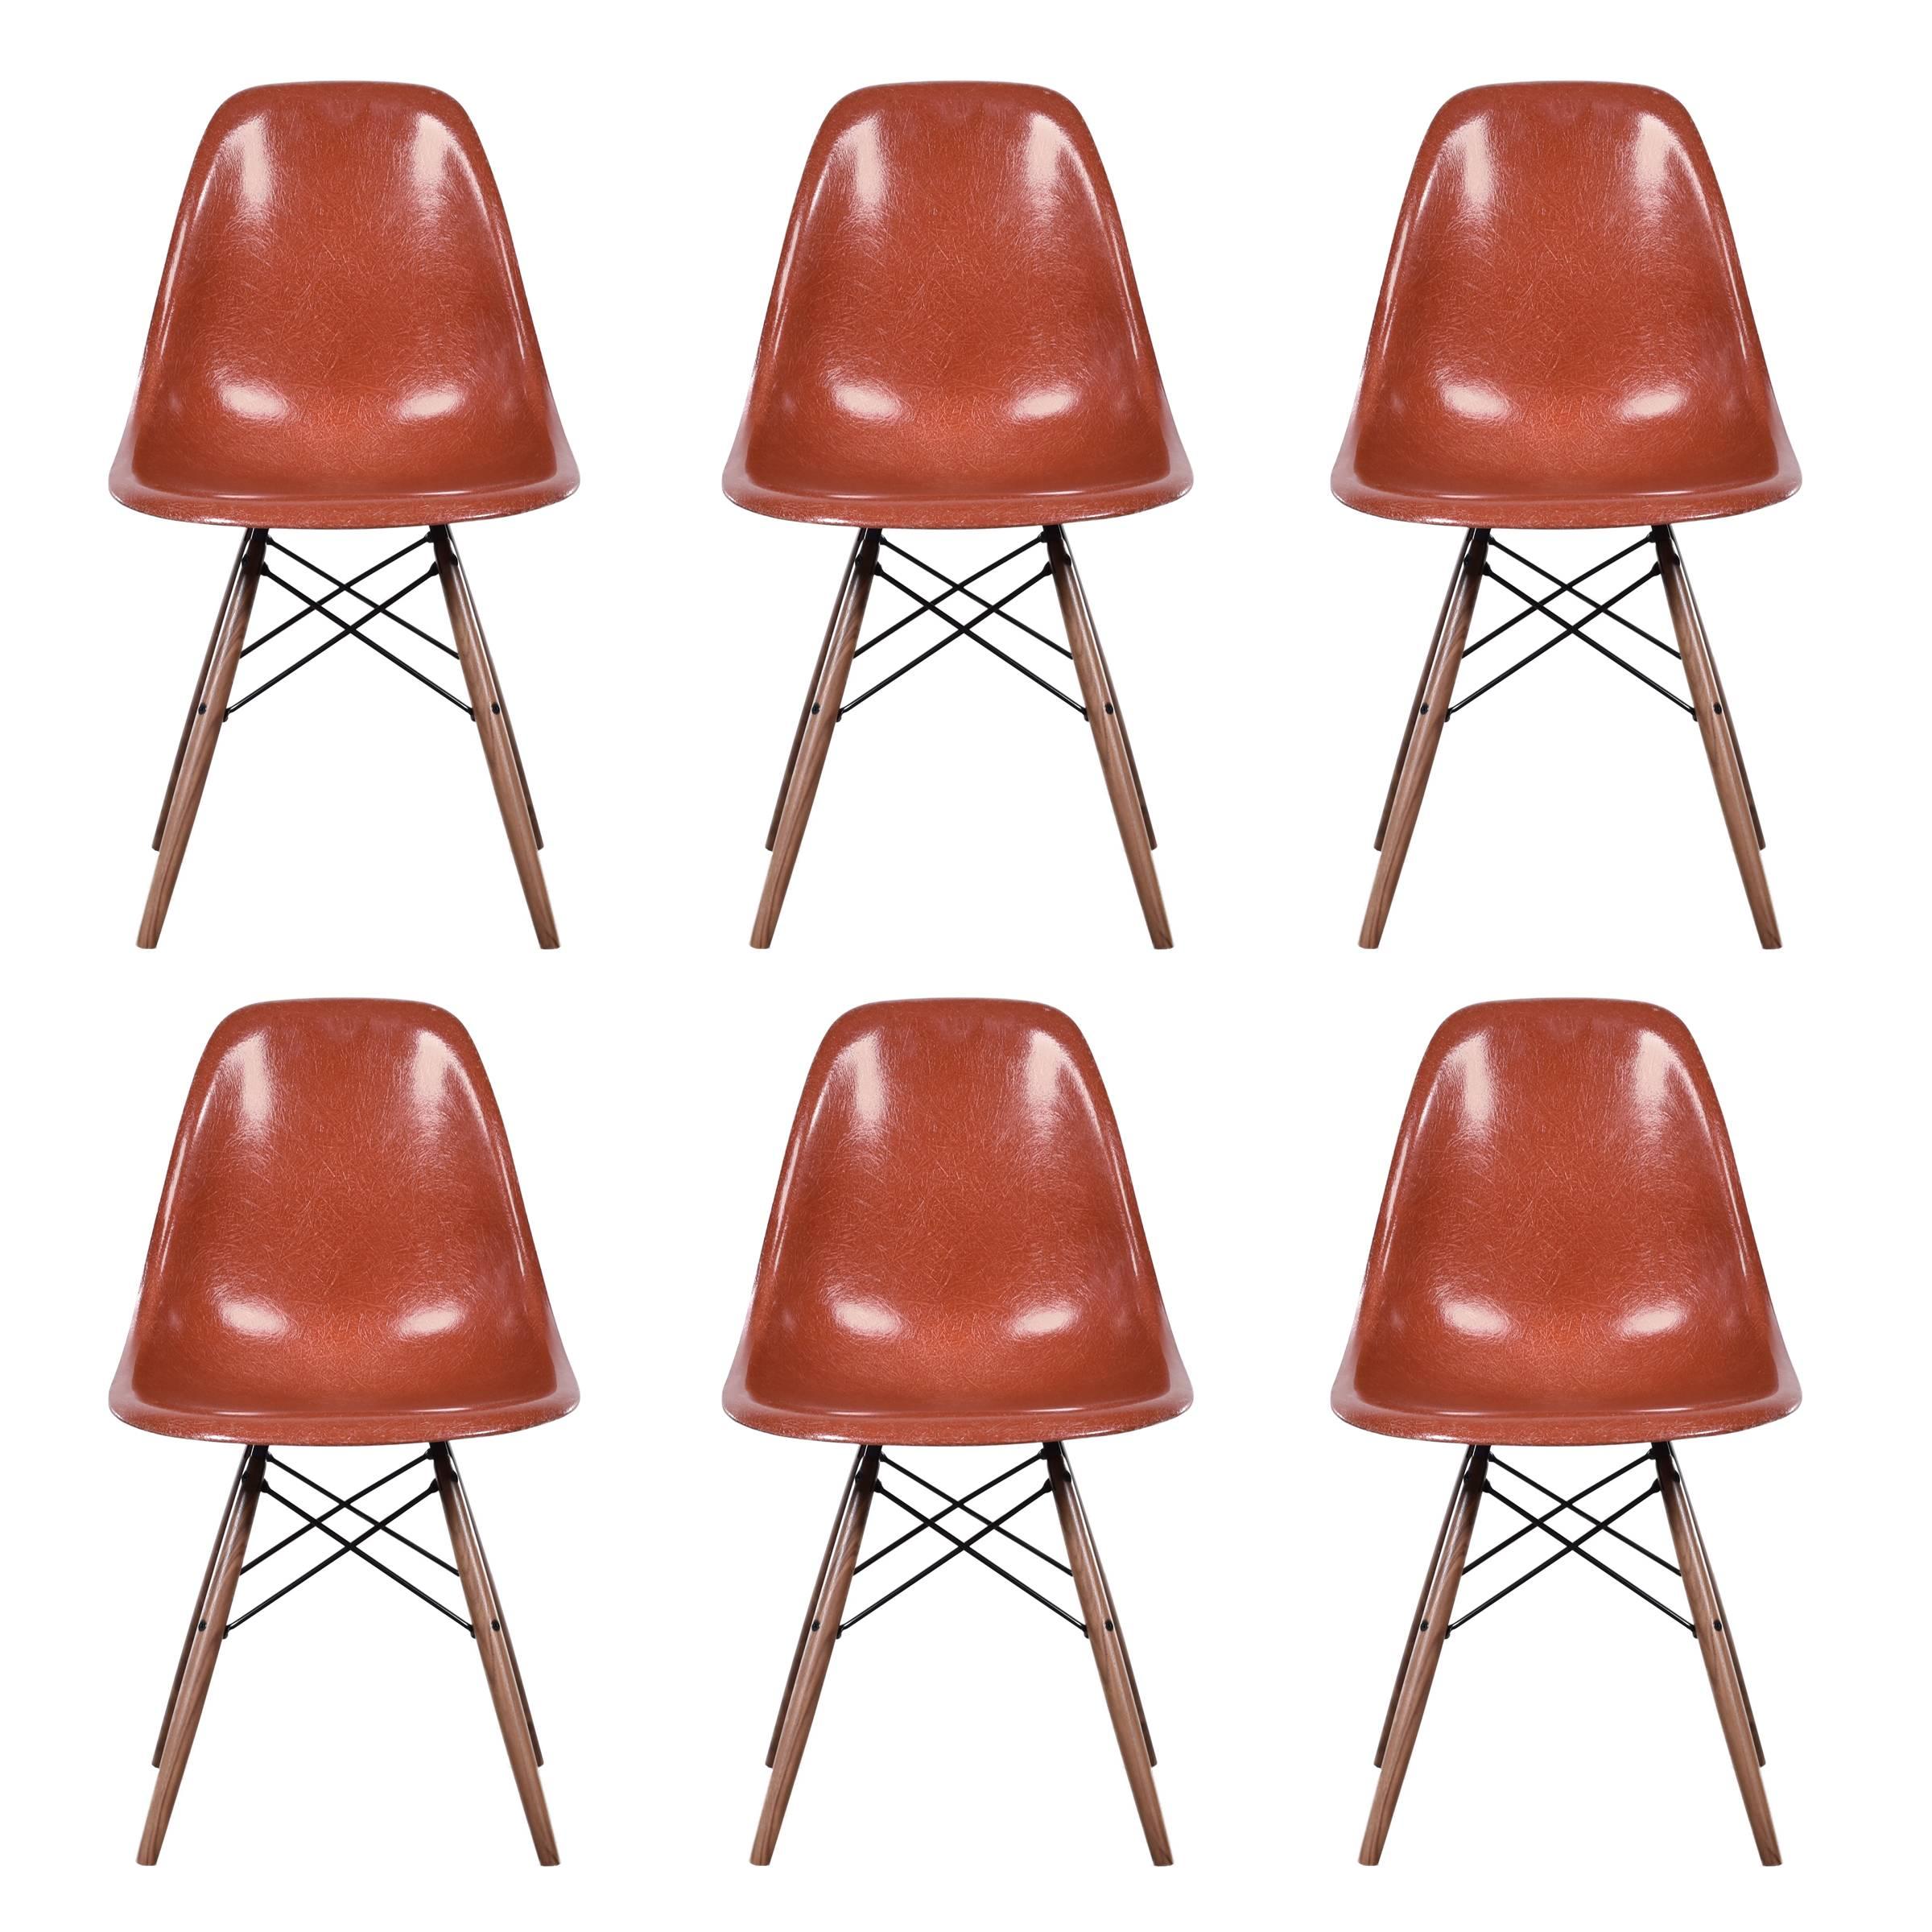 Set of Six Eames Terra Cotta DSW Herman Miller, USA Dining Chairs